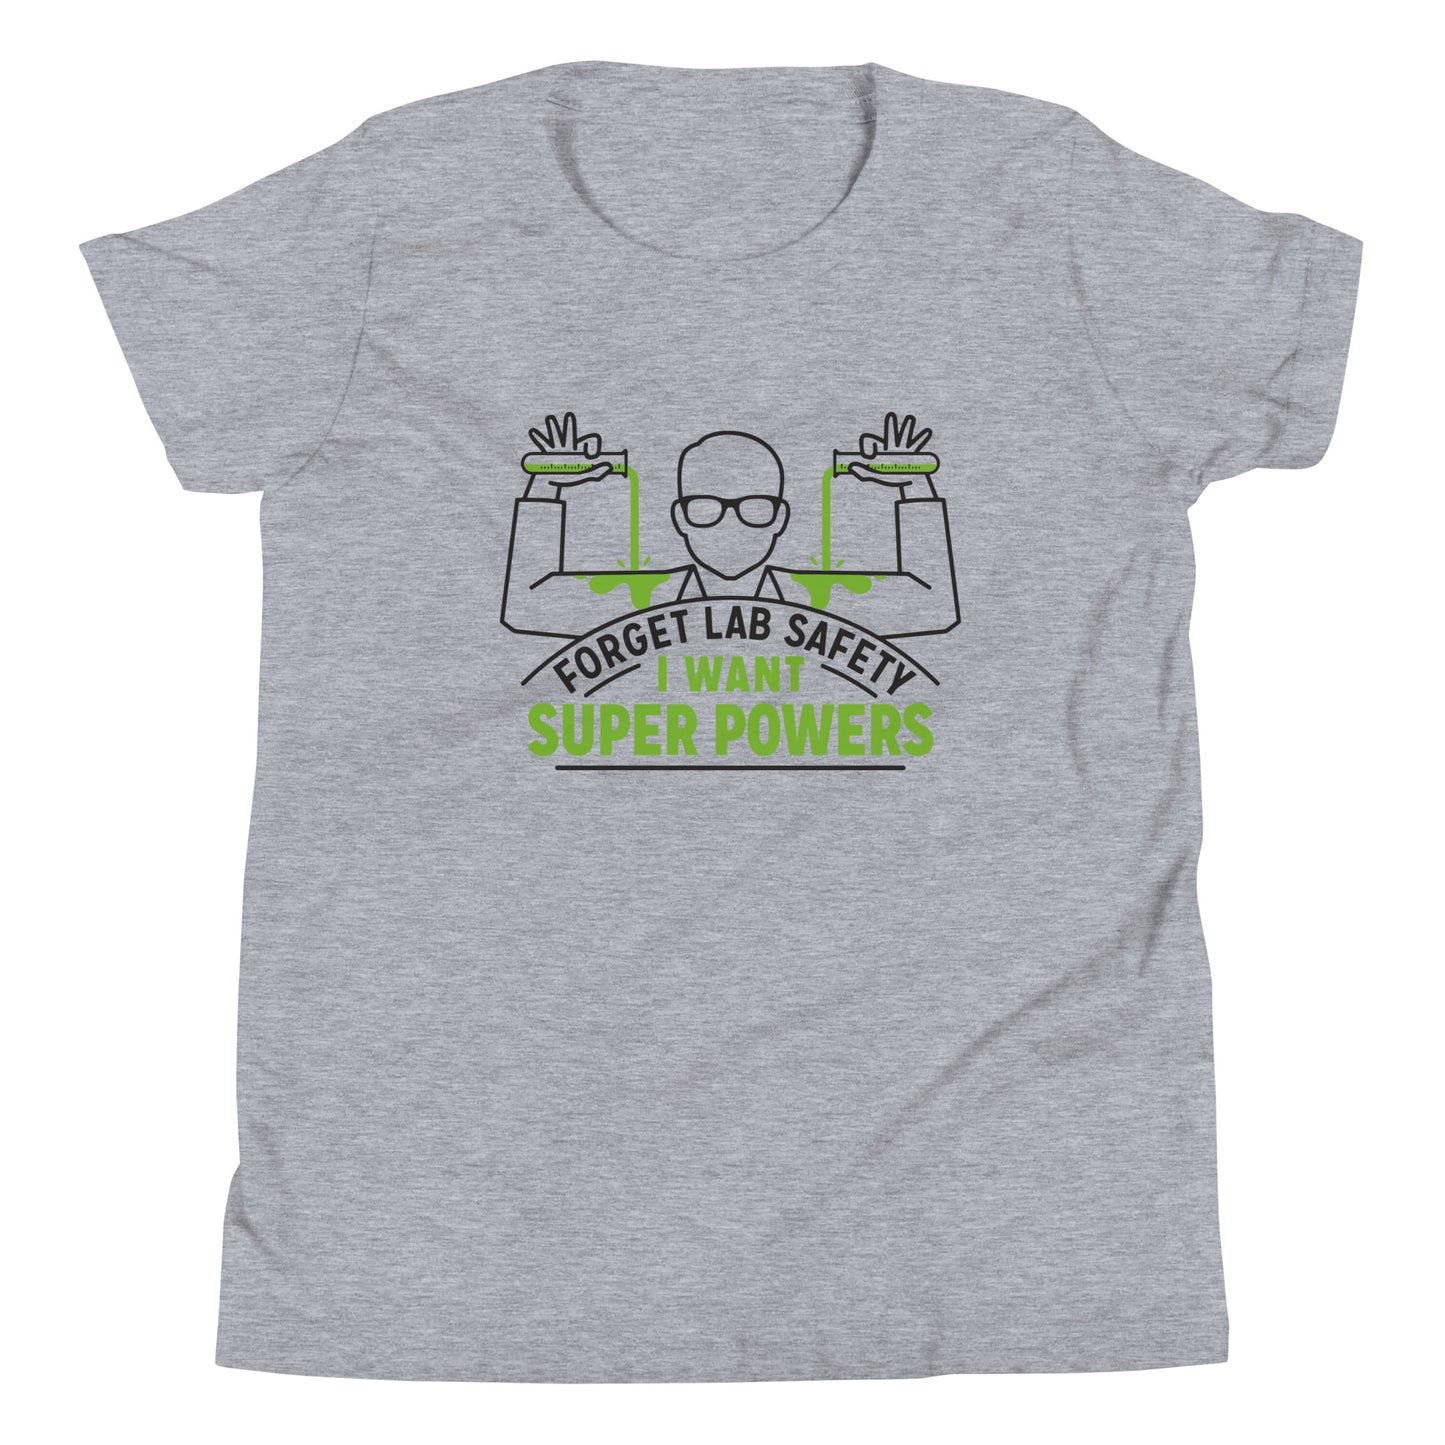 Forget Lab Safety Kid's Youth Tee